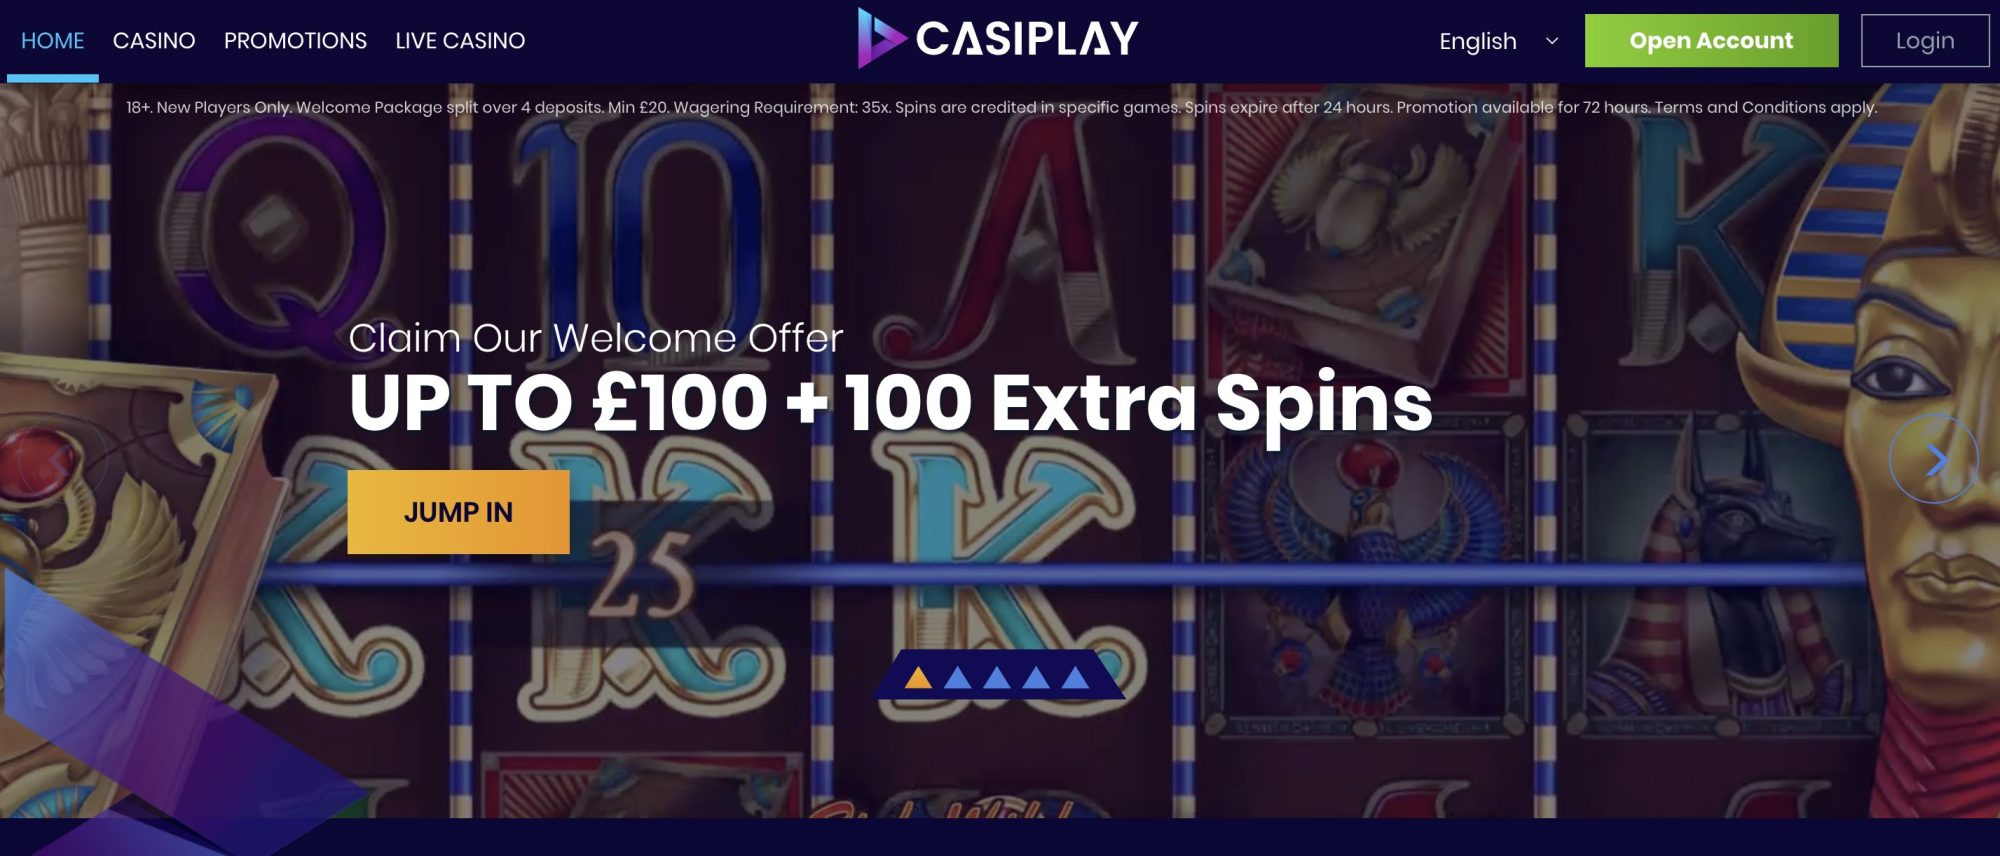 Casiplay free spins